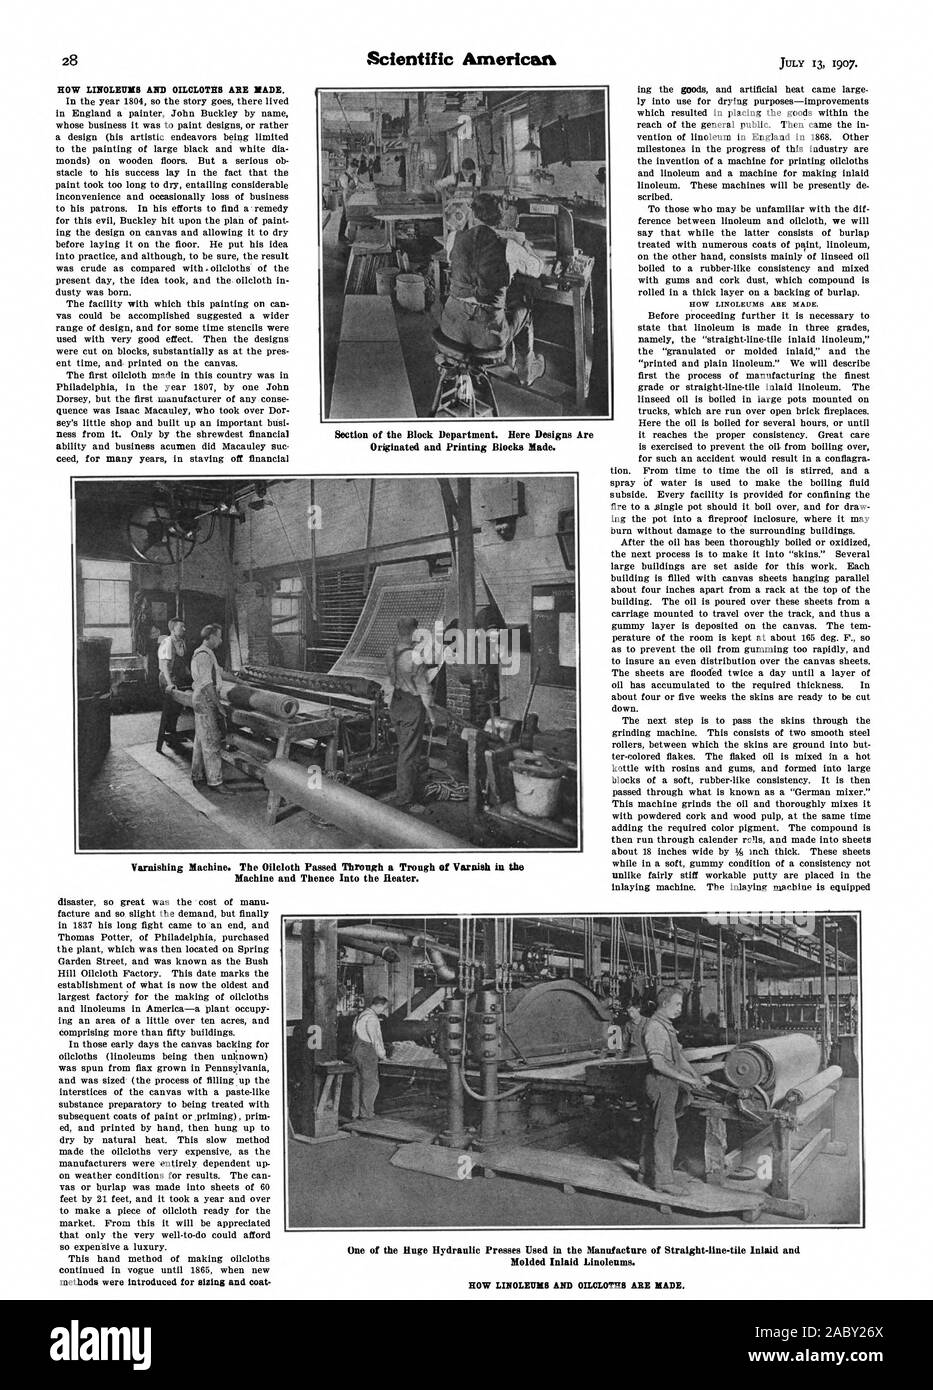 HOW LINOLEUM AND OILCLOTHS ARE MADE. Section of the Block Department. Here Designs Are Originated and Printing Blocks Made. Machine and Thence Into the Heater. HOW LINOLEUM AND OILCLOTHS ARE MADE. One of the Huge Hydraulic Presses Used in the Manufacture of Straight-line-tile Inlaid and Molded Inlaid Linolenms., scientific american, 1907-07-13 Stock Photo